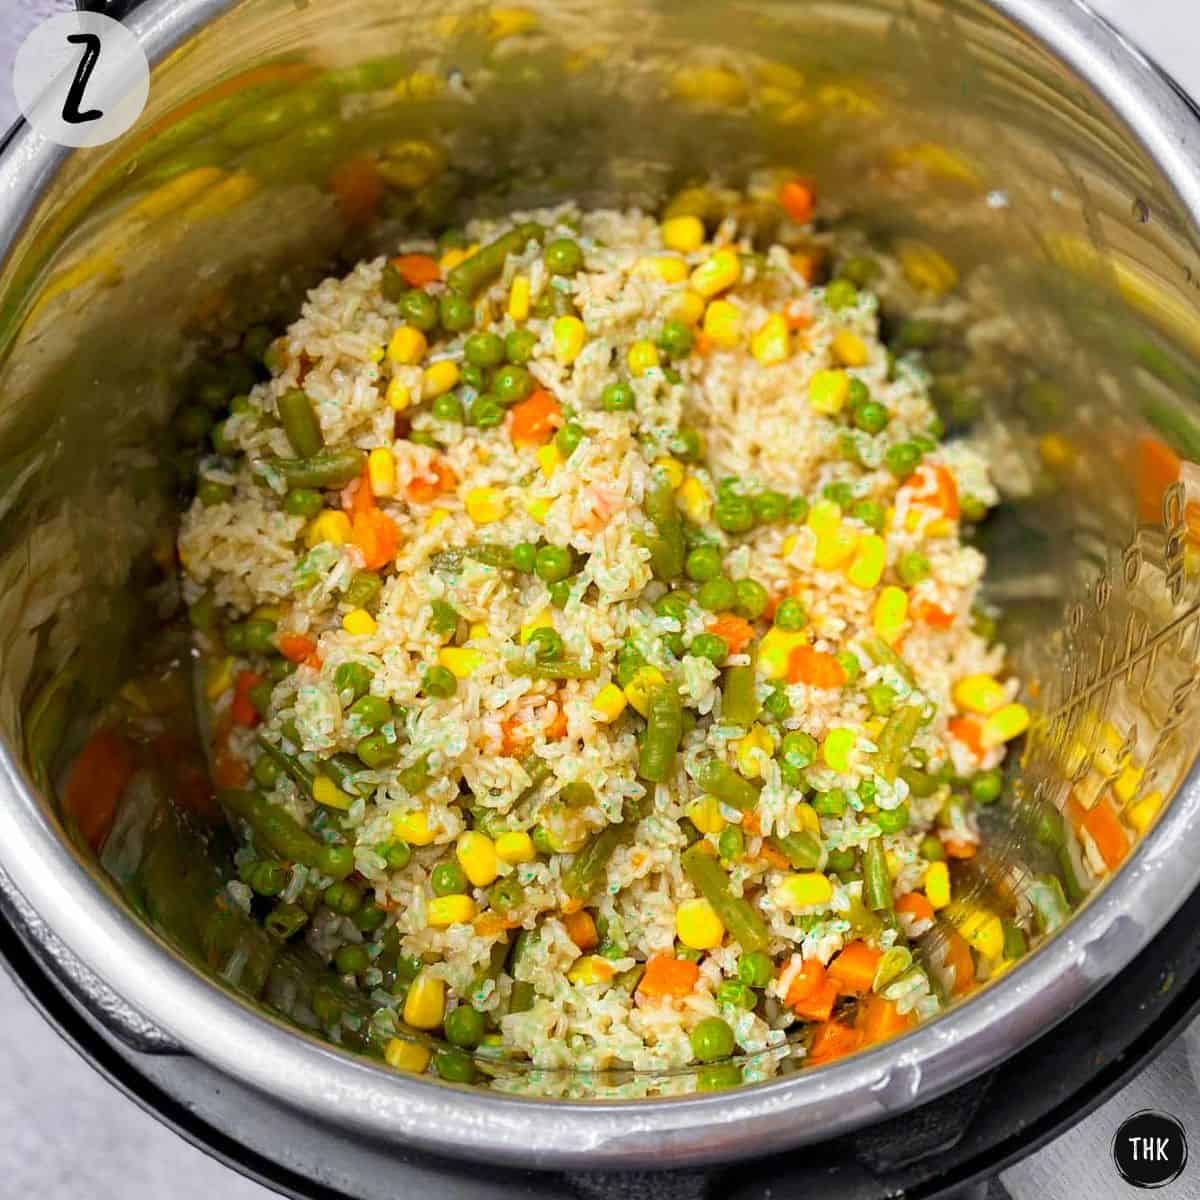 Instant Pot with cooked rice and veggies inside.